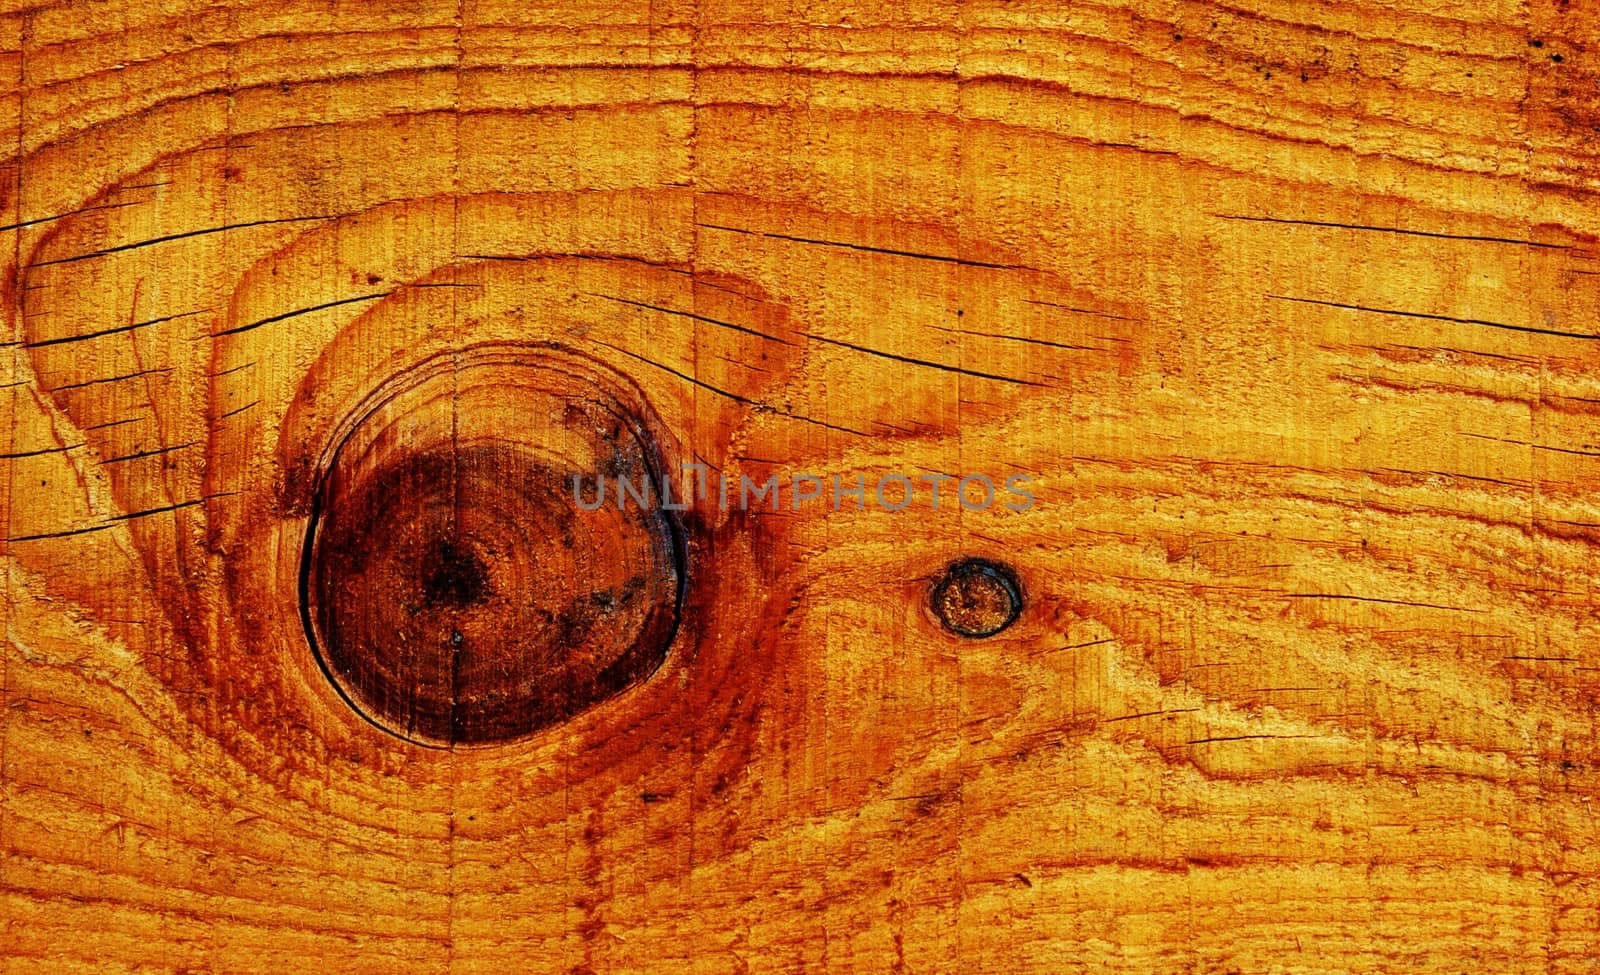 Wood Grain Background Texture with Knot by RichieThakur